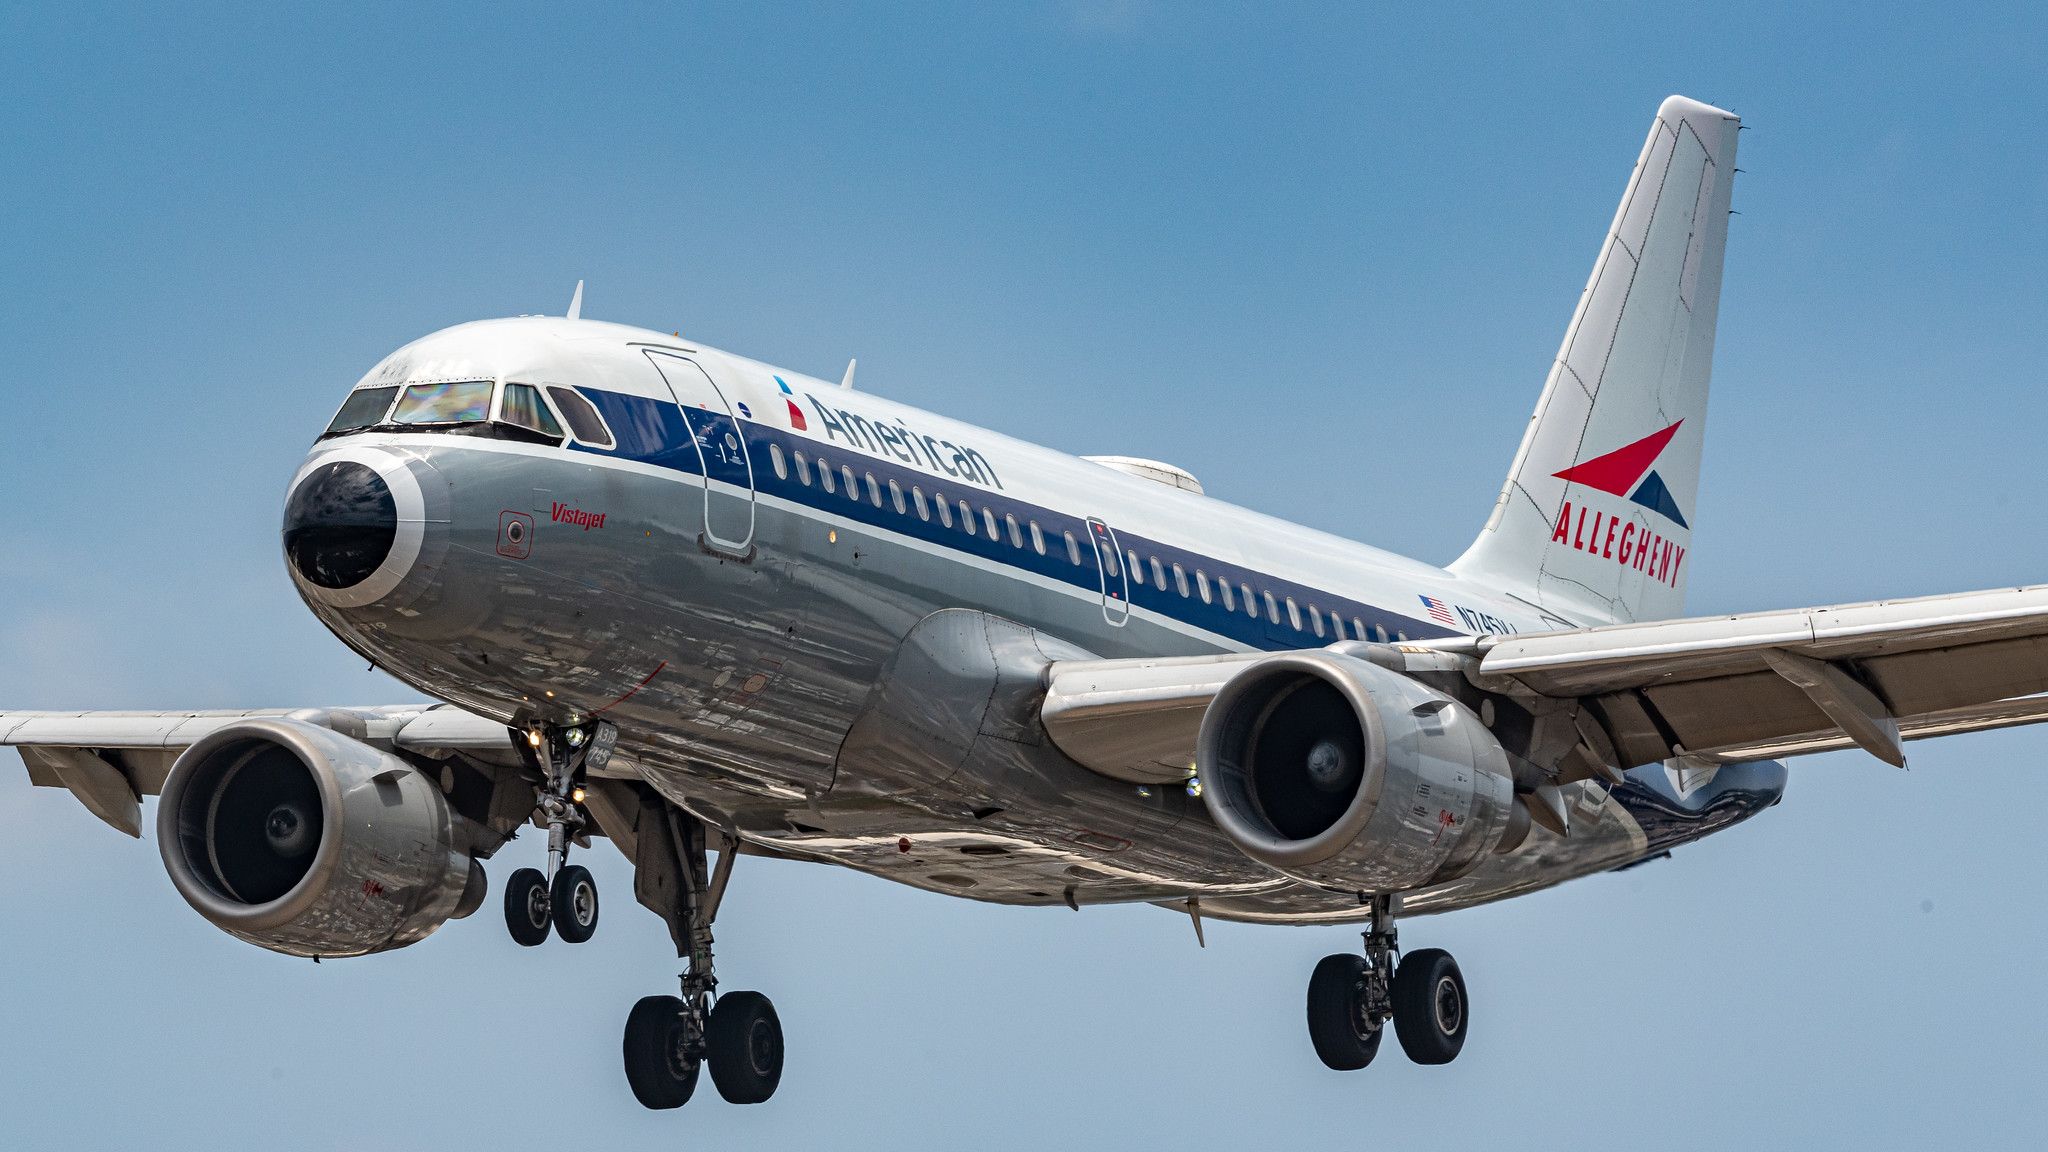 American Airlines Airbus A319 Allegheny Retro Livery